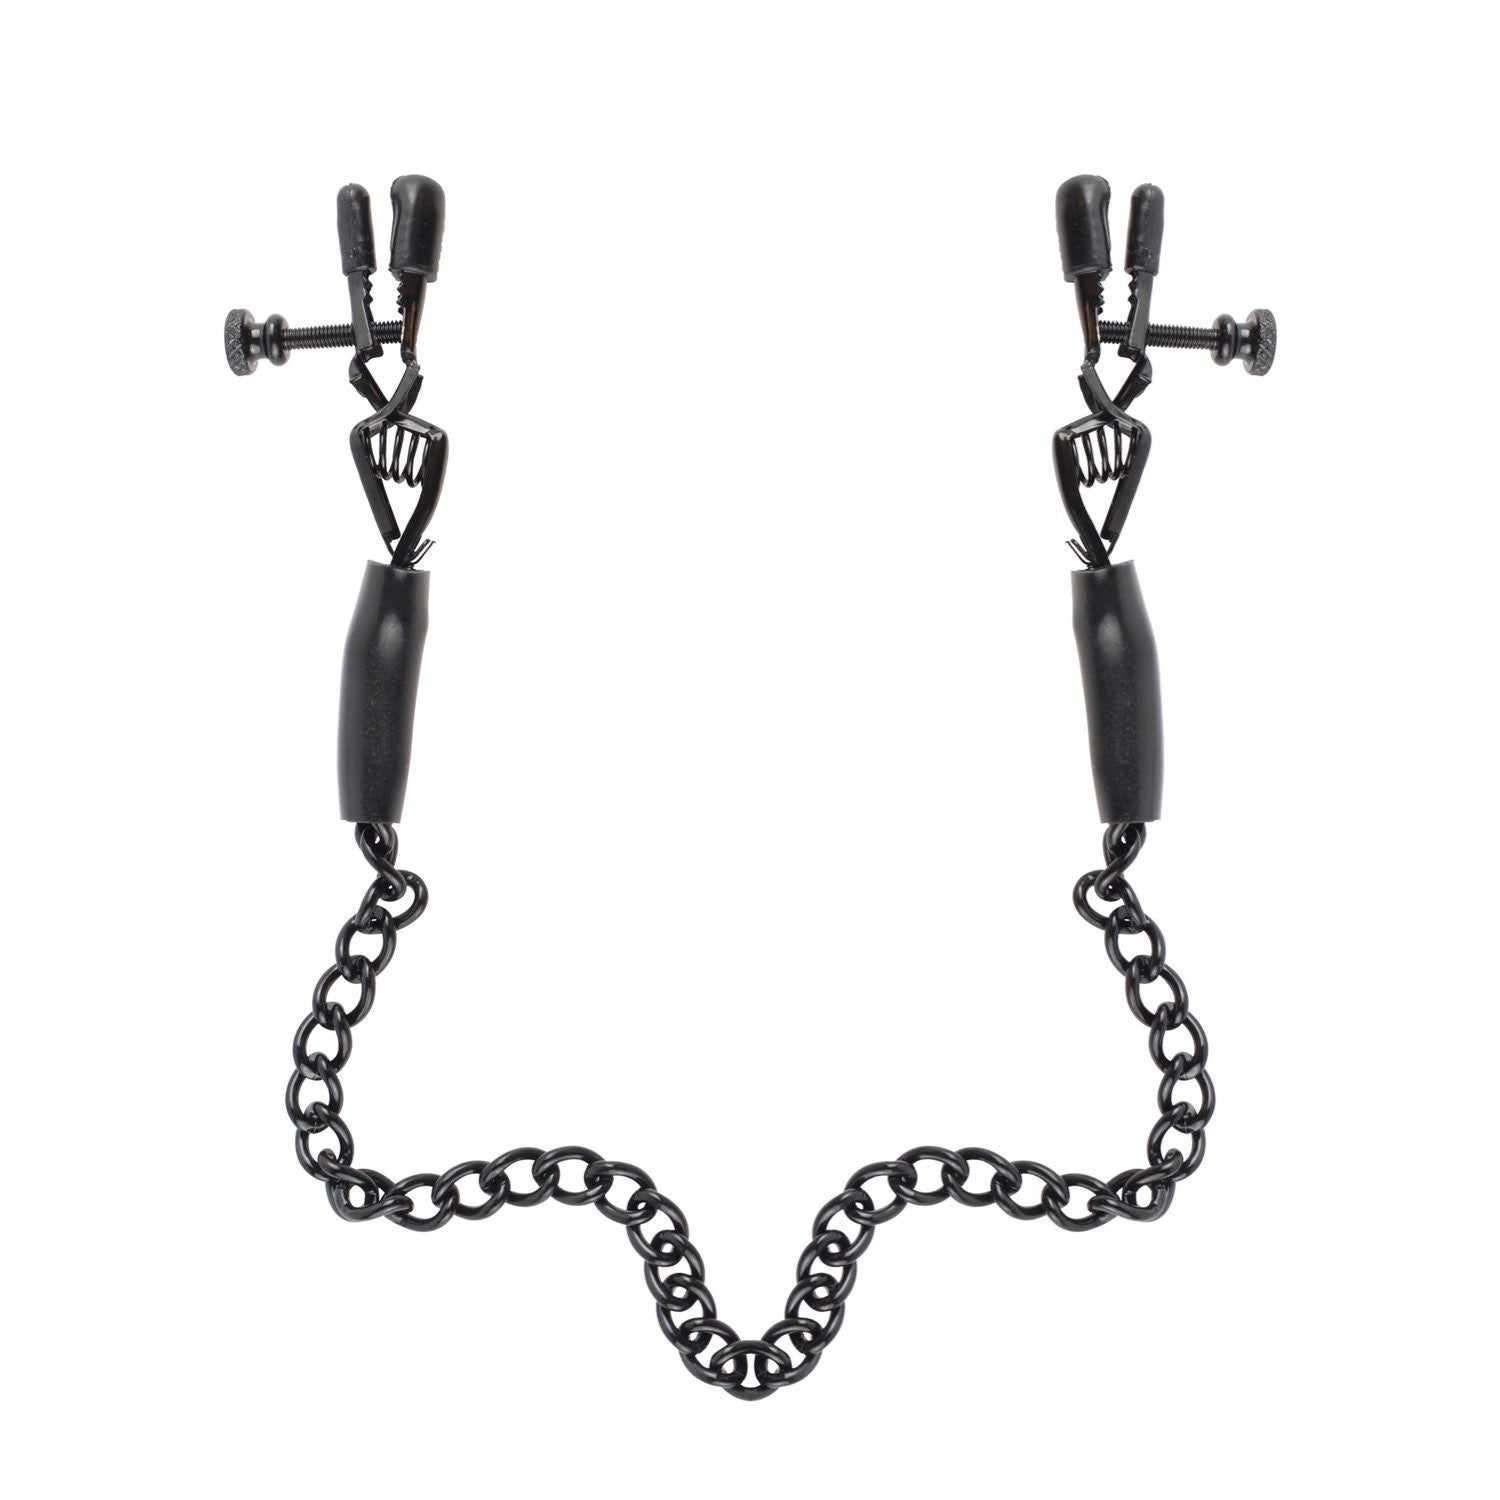 Fetish Fantasy Series Adjustable Nipple Chain Clamps - Black Nipple Clamps with Chain by Pipedream